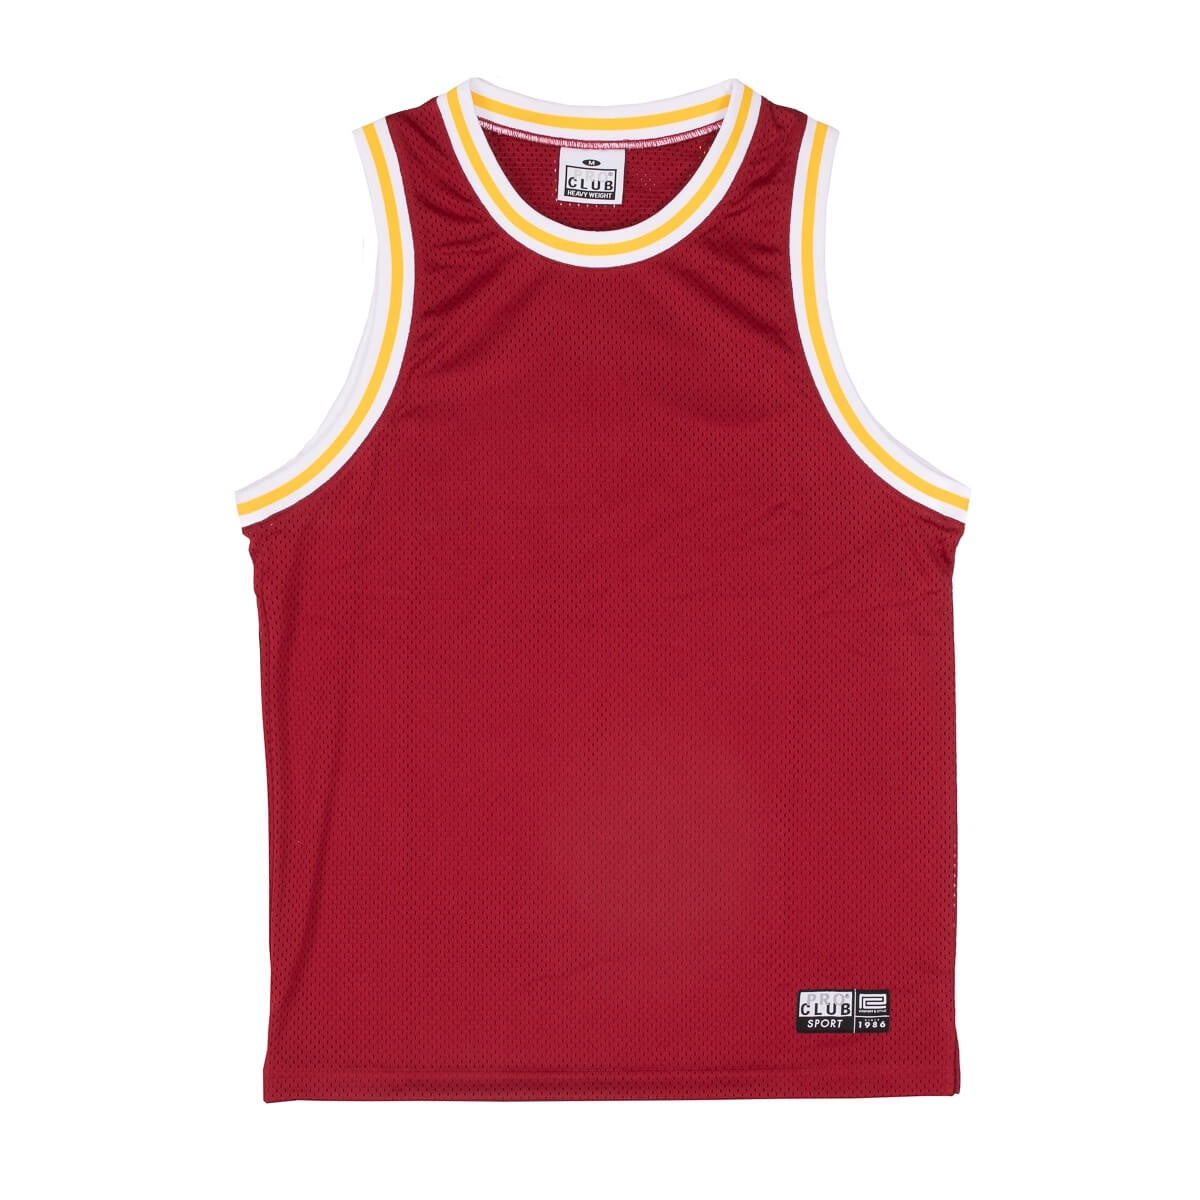 Pro Club Classic Basketball Jersey - Red/White/Gold